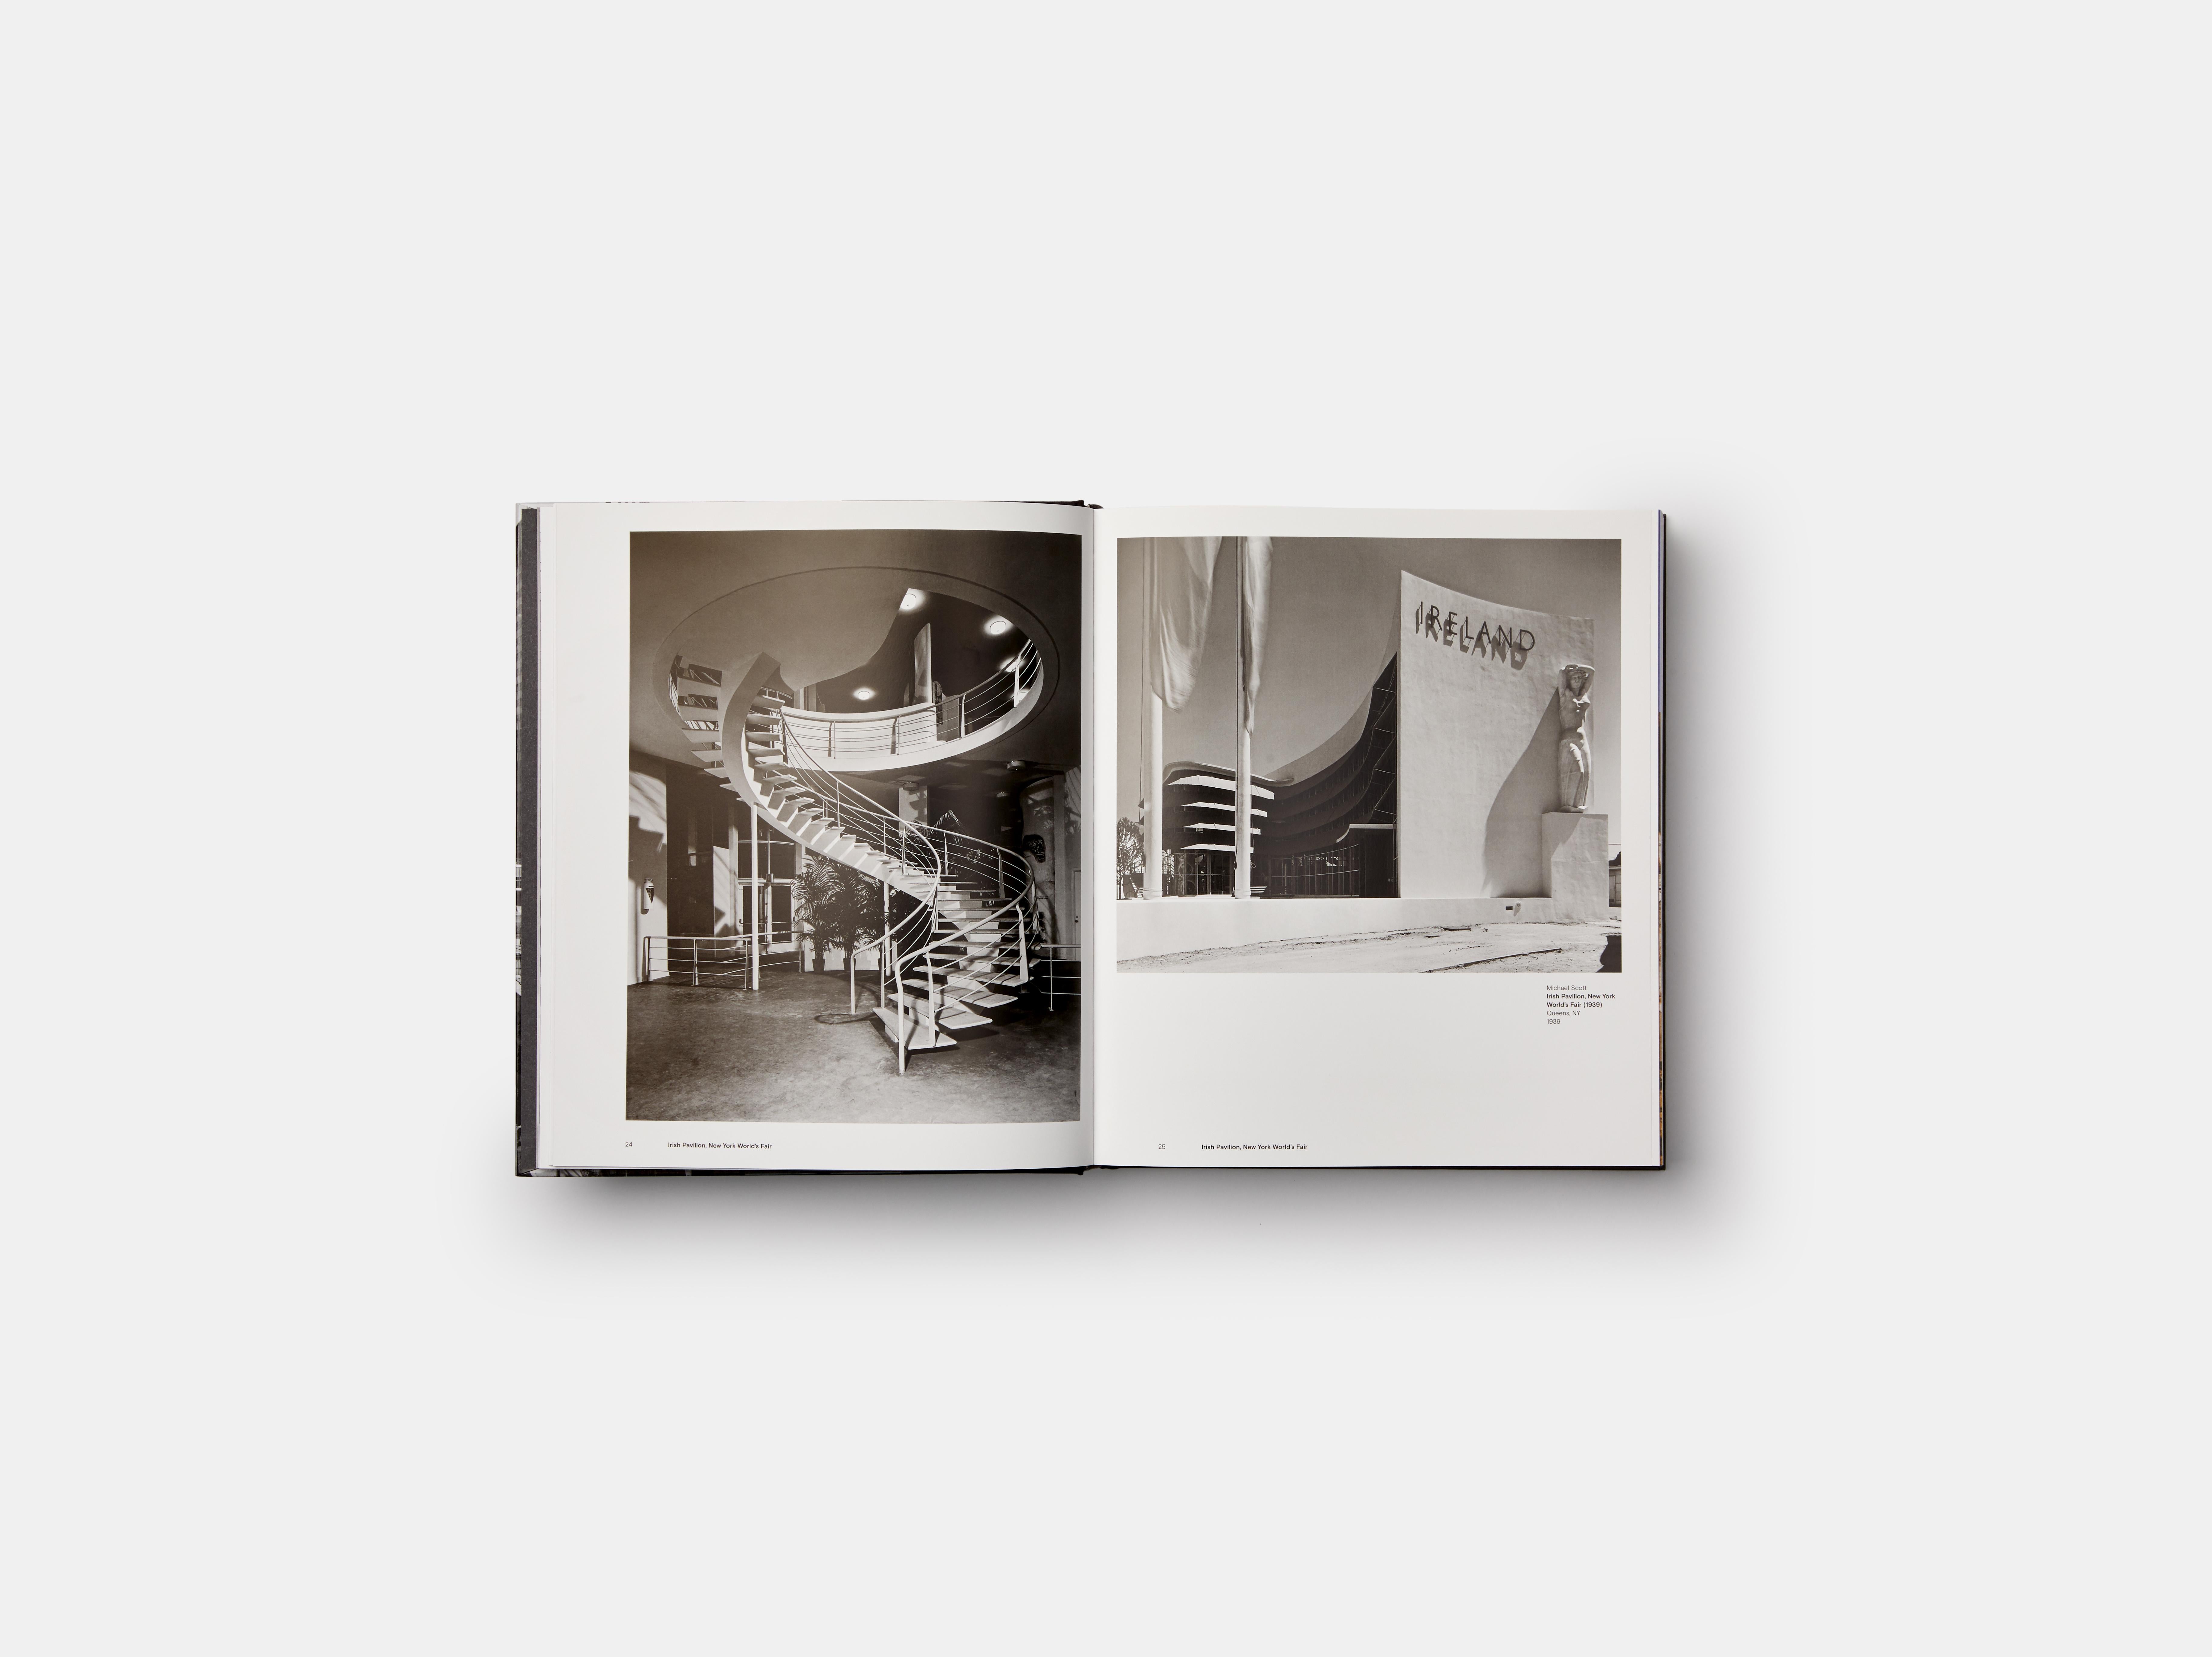 A captivating history of 20th century Modern American architecture, as seen through the eyes of a legendary photographer

It is impossible to overstate the importance of photography's role in shaping the world's perception of architecture. And